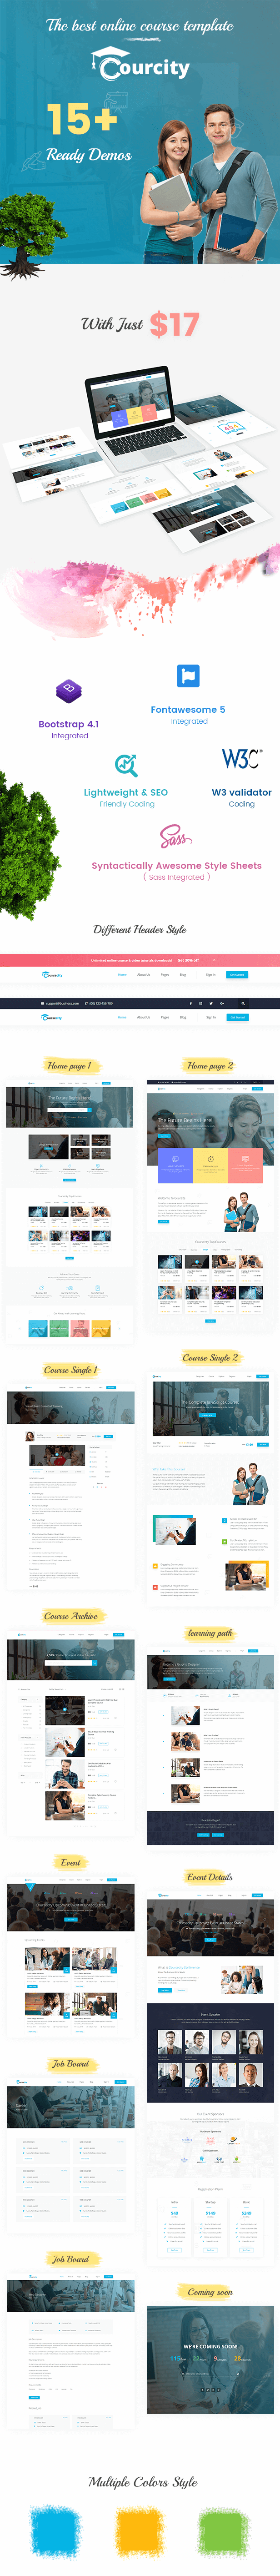 Courcity Online couse html template